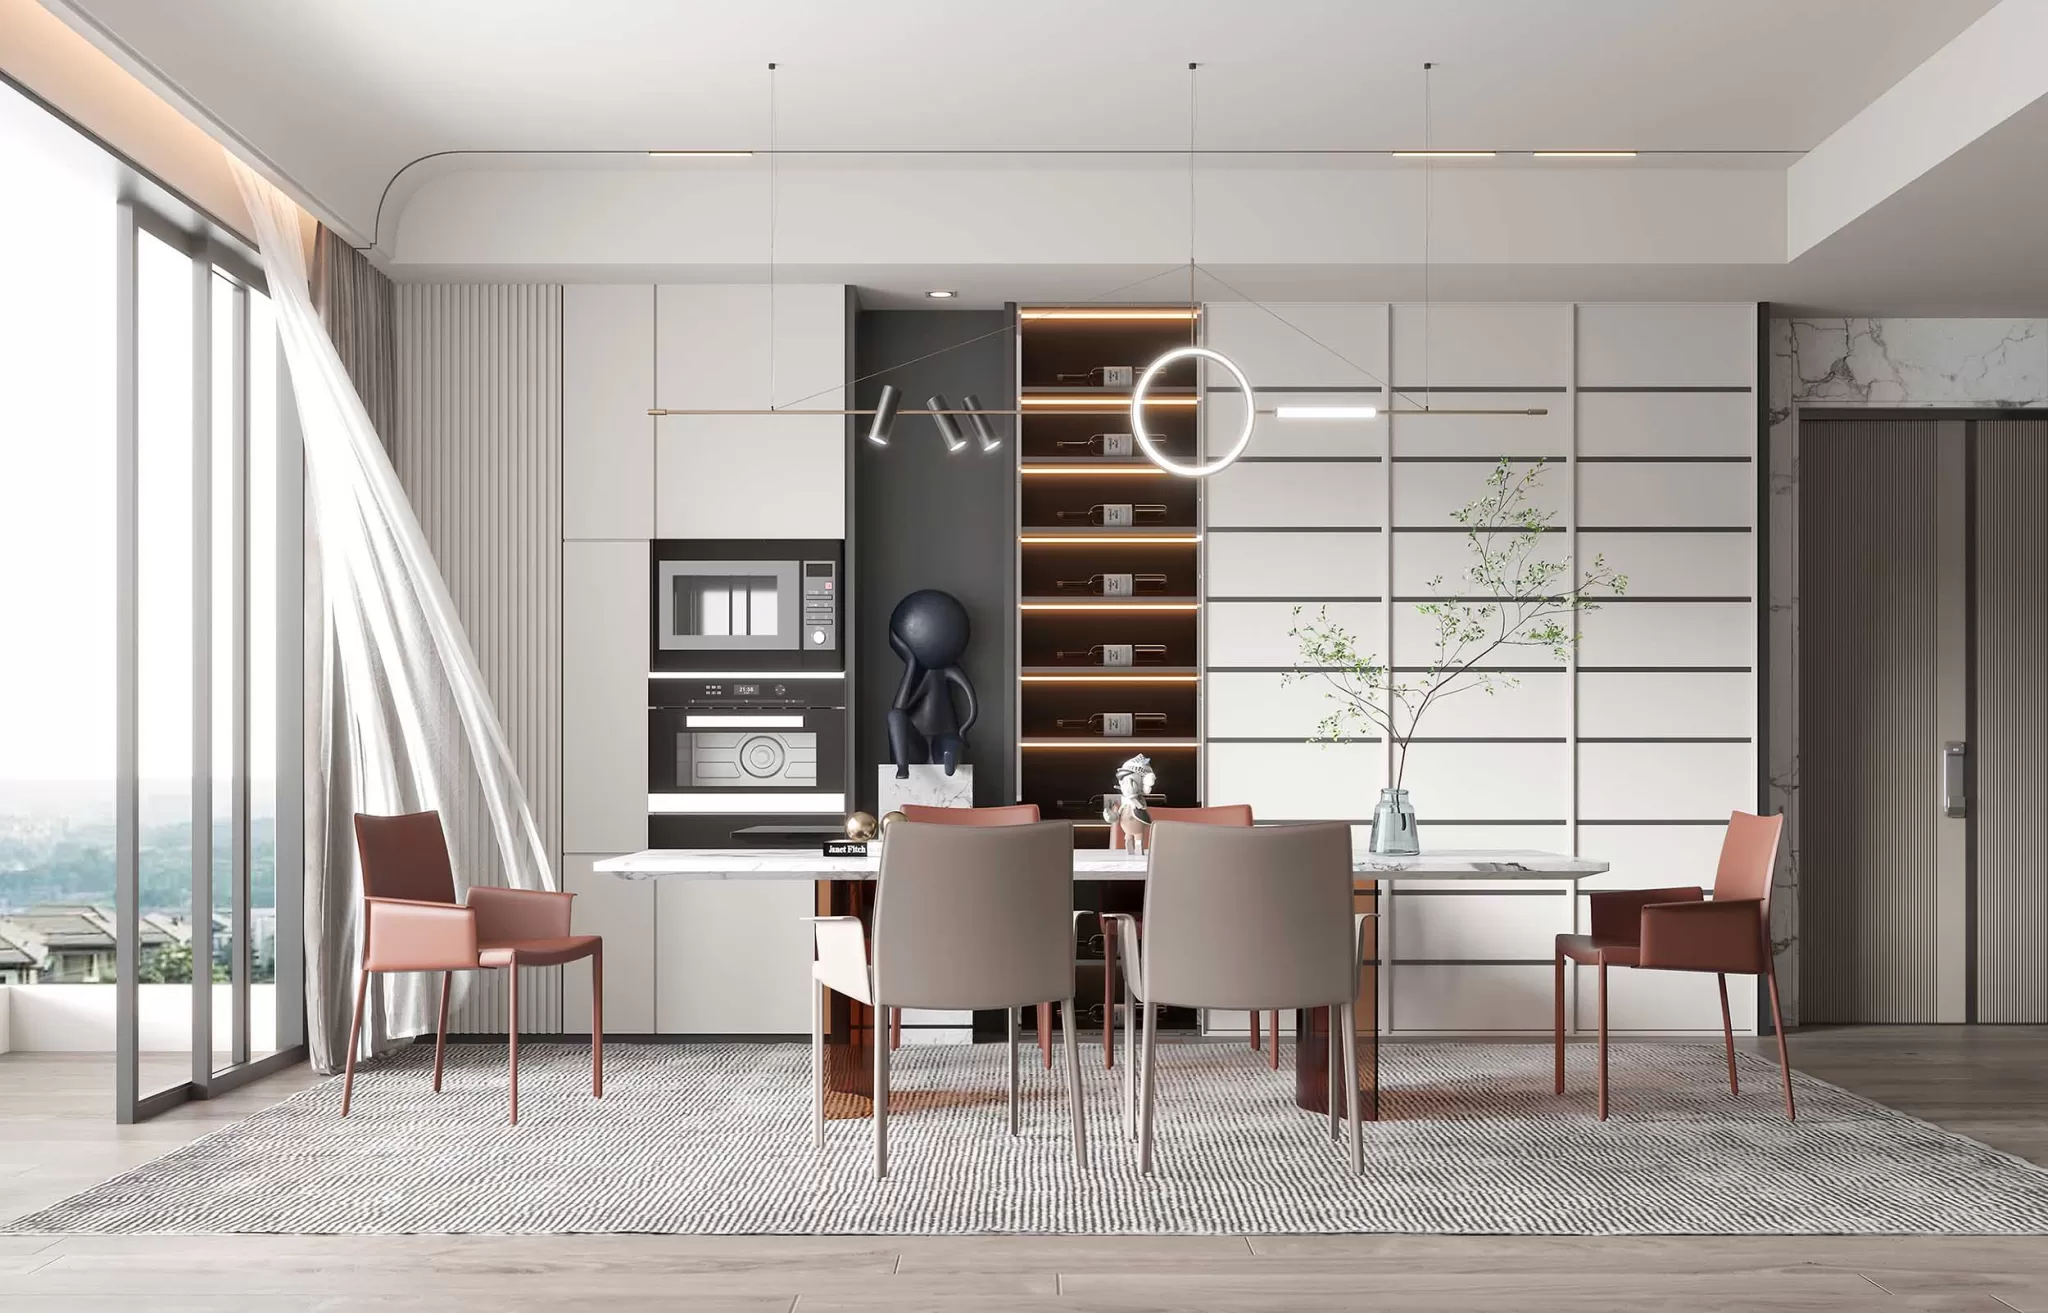 HOUSE SPACE 3D SCENES – DINING ROOM – 0056